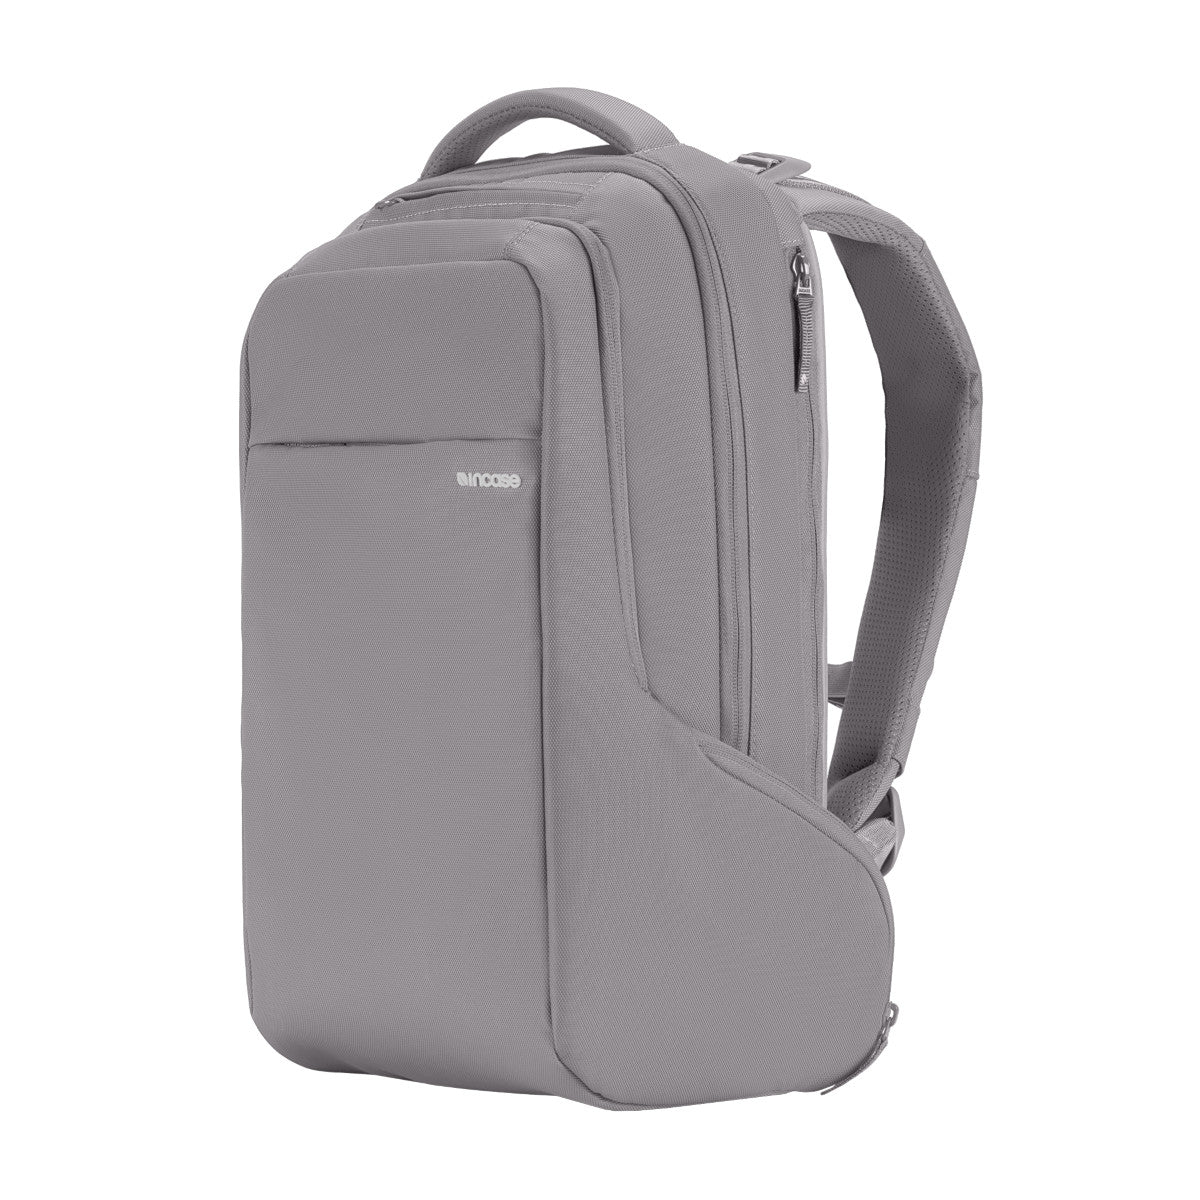 ICON Backpack – Incase.com